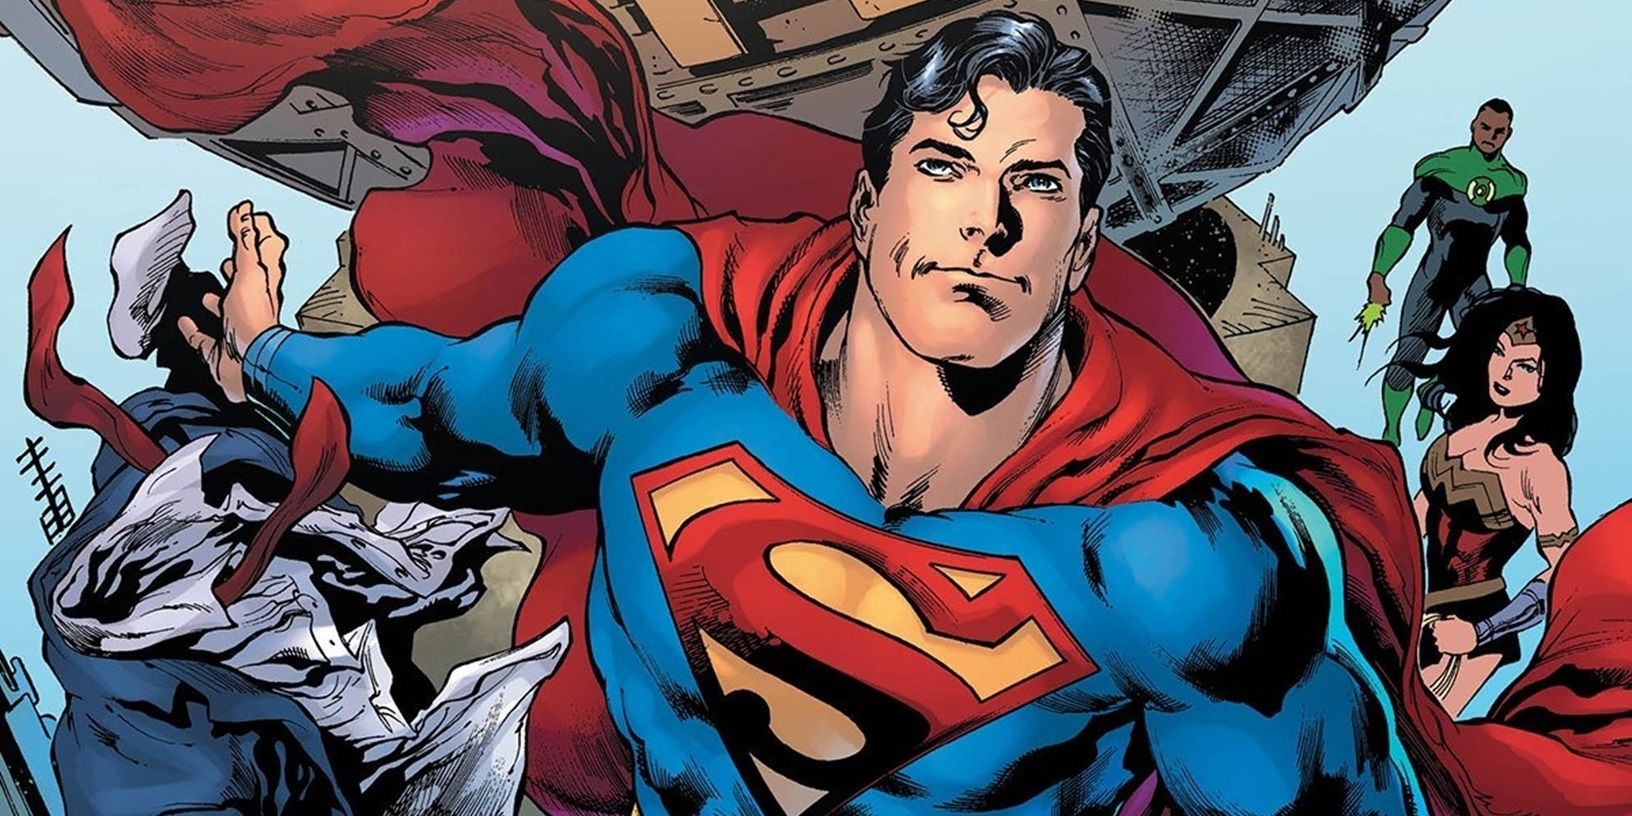 Superman flying in the comics with the Justice League